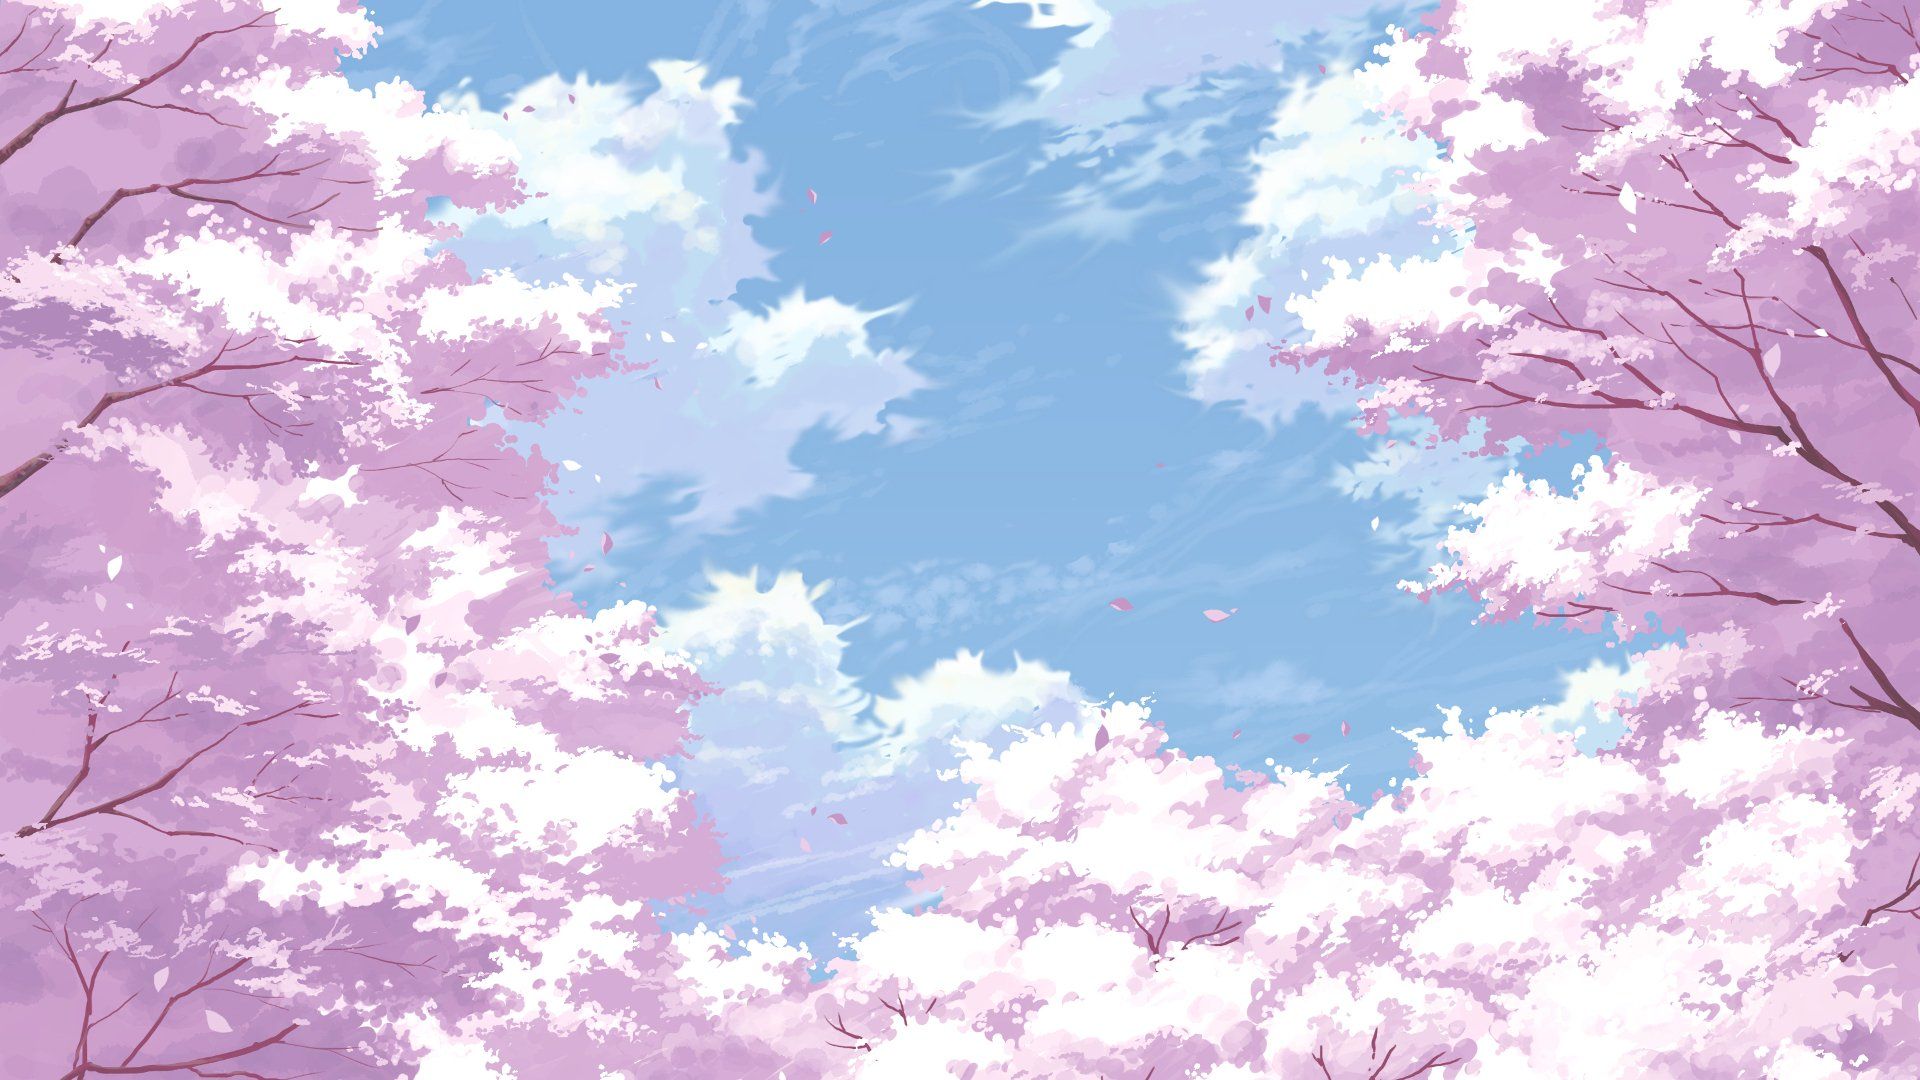 438770 anime trees cherry blossom sky street clouds Japan house  plants  Rare Gallery HD Wallpapers